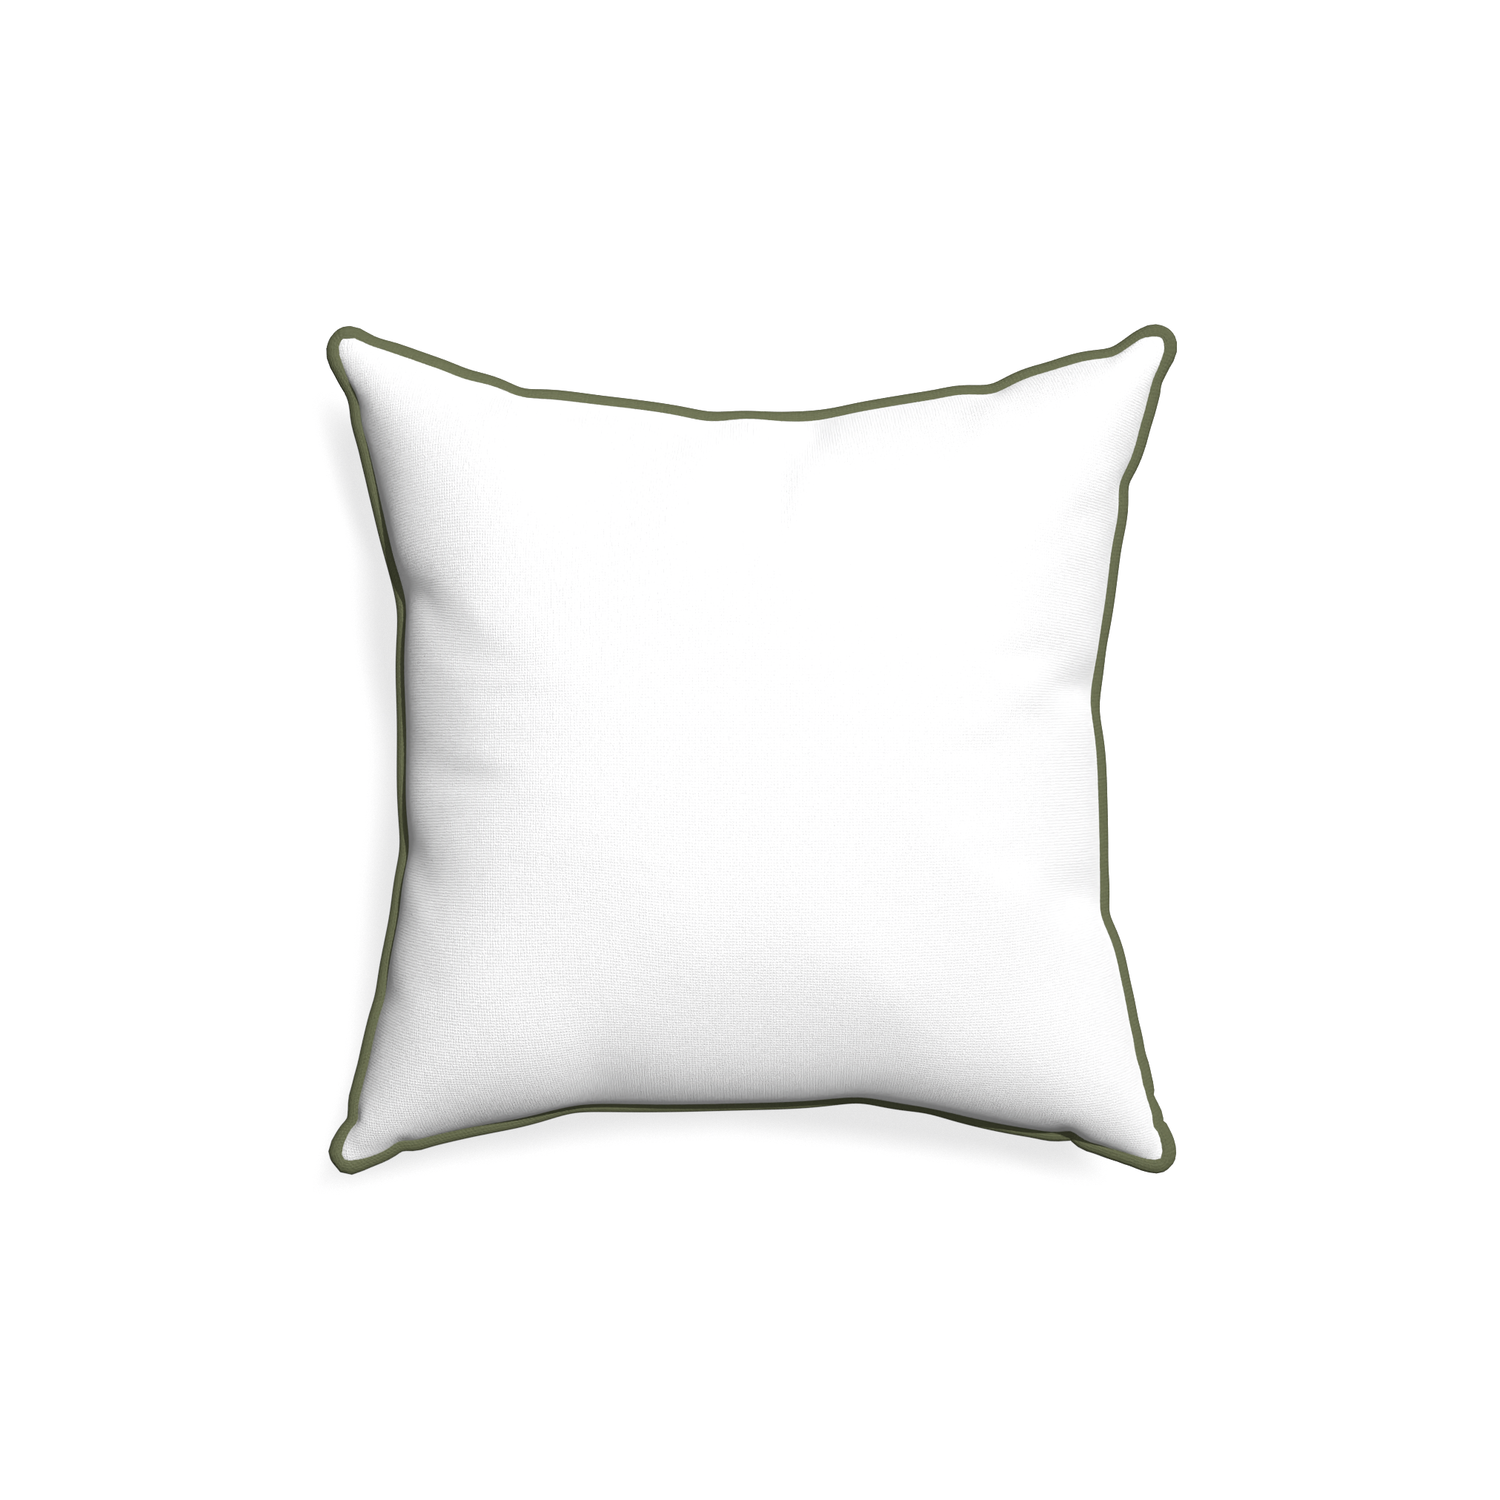 18-square snow custom pillow with f piping on white background